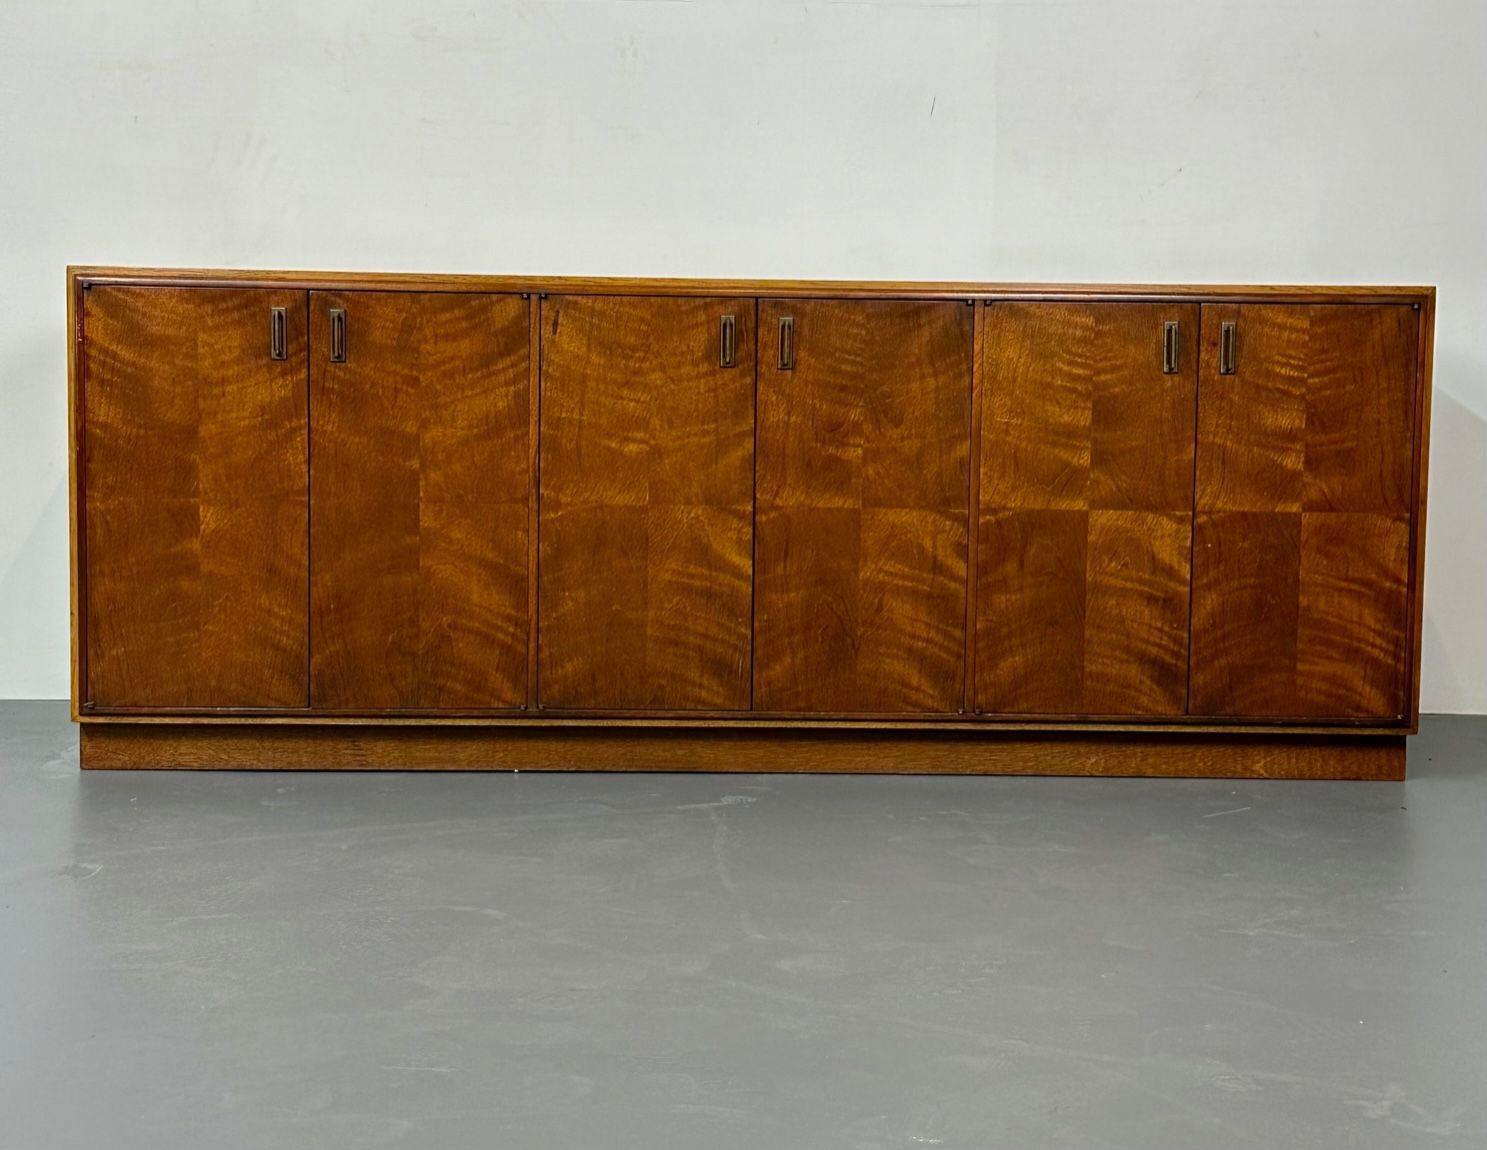 Vintage American Mid-Century Modern, dresser, sideboard or buffet, Founders
 
A finely crafted Founders Furniture dresser with three double door divisions. The center double door section opens to four fitted interior drawers while the left and